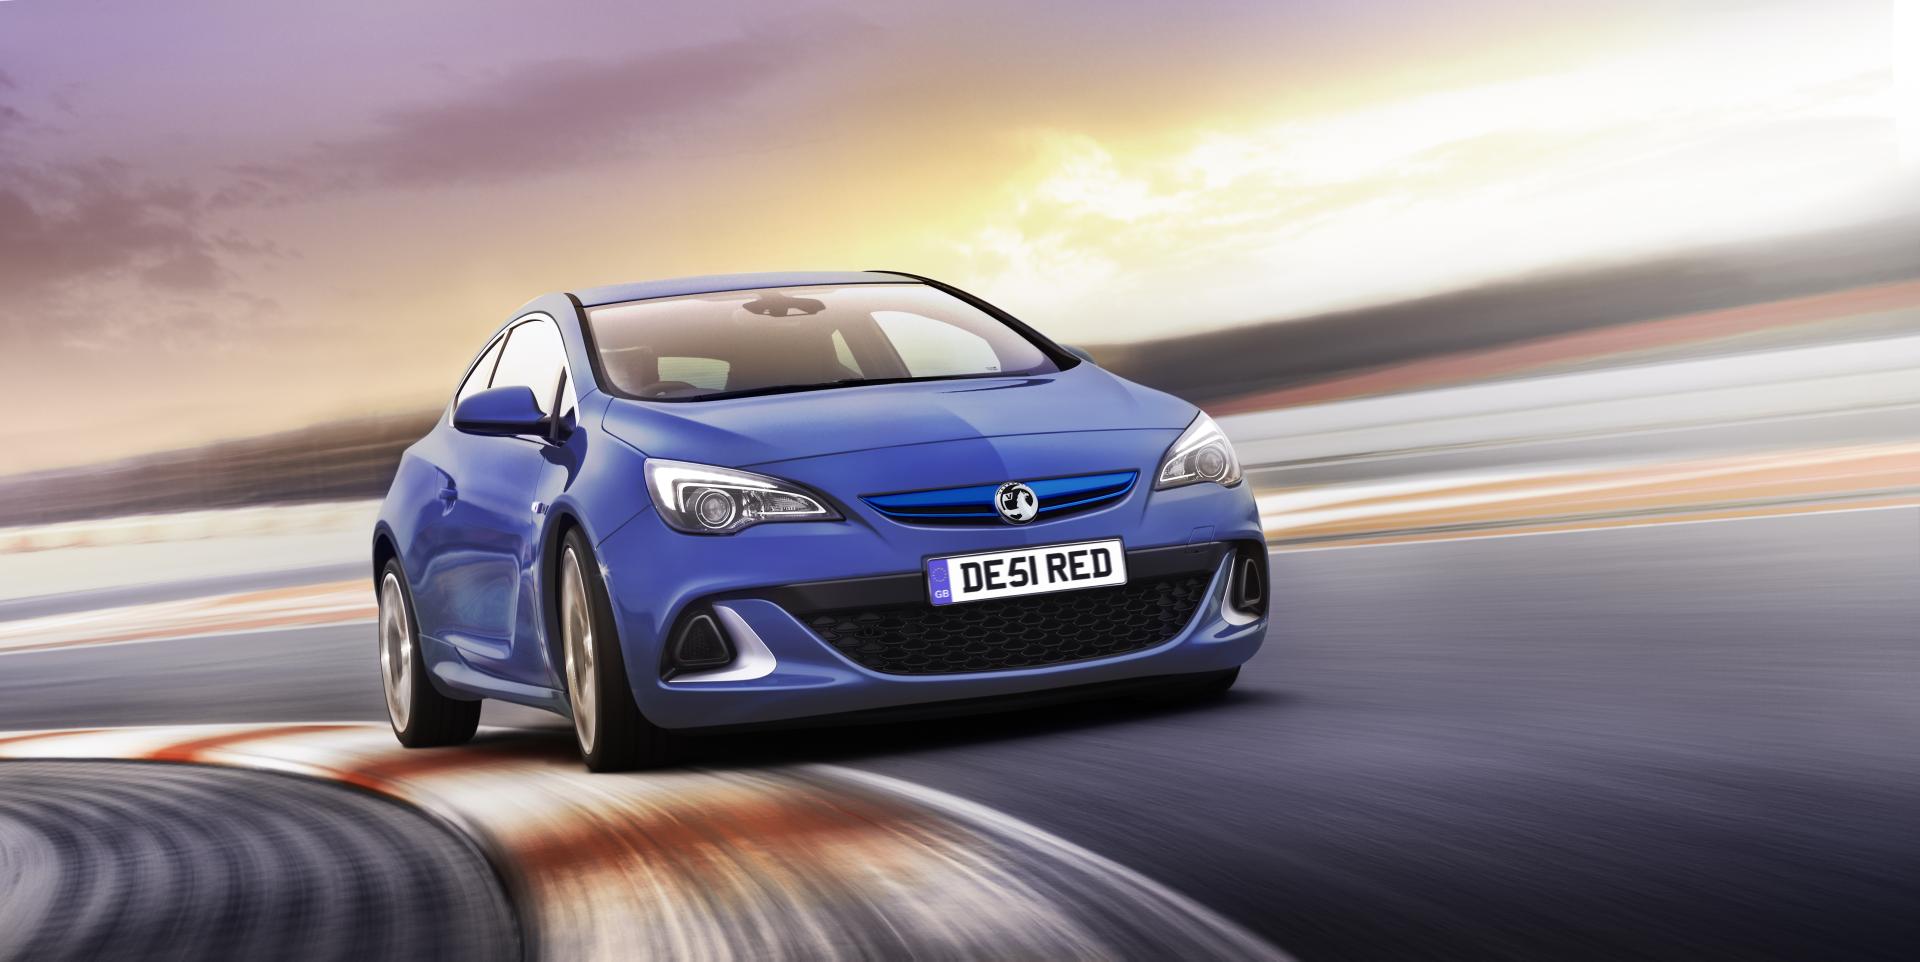 public Disability did it 2012 Vauxhall Astra VXR News and Information